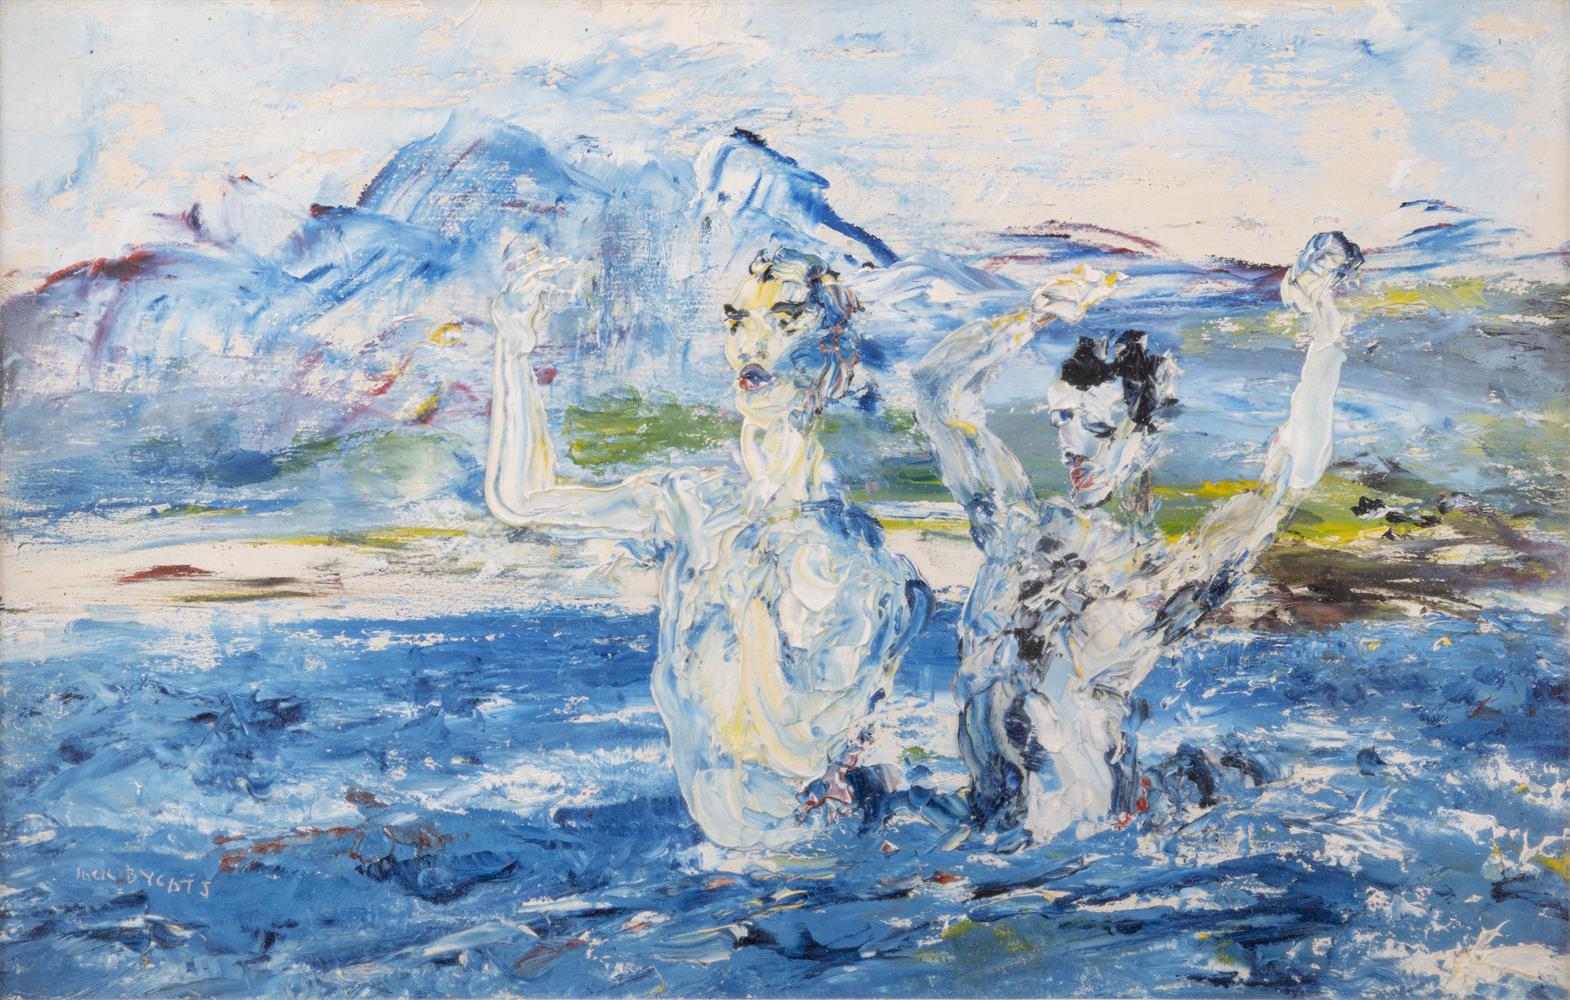 Jack Butler Yeats RHA (1871-1957) The Duet (1945) Oil on board, 23 x 35.5cm (9 x 14") Signed;